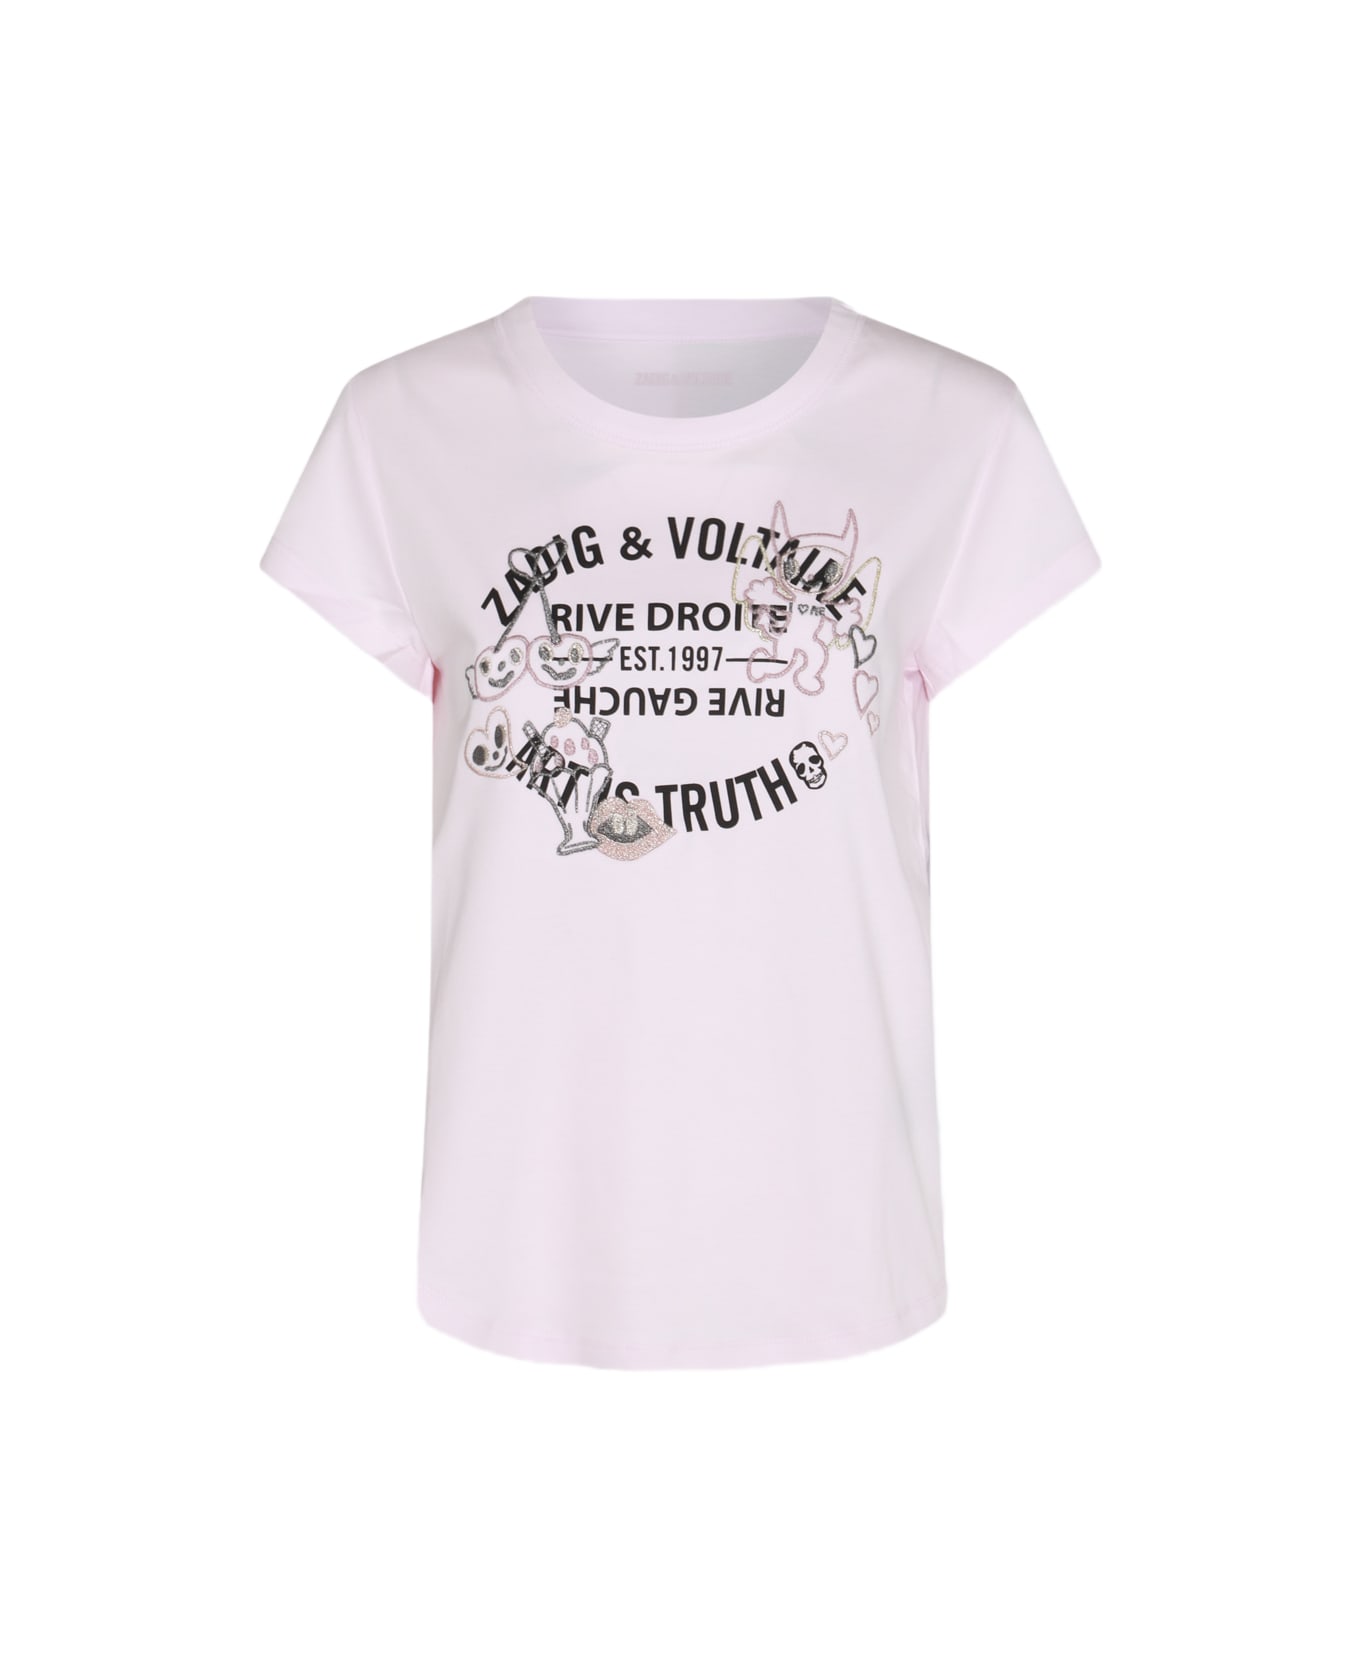 Zadig & Voltaire Pink And Black Cotton T-shirt - PARME